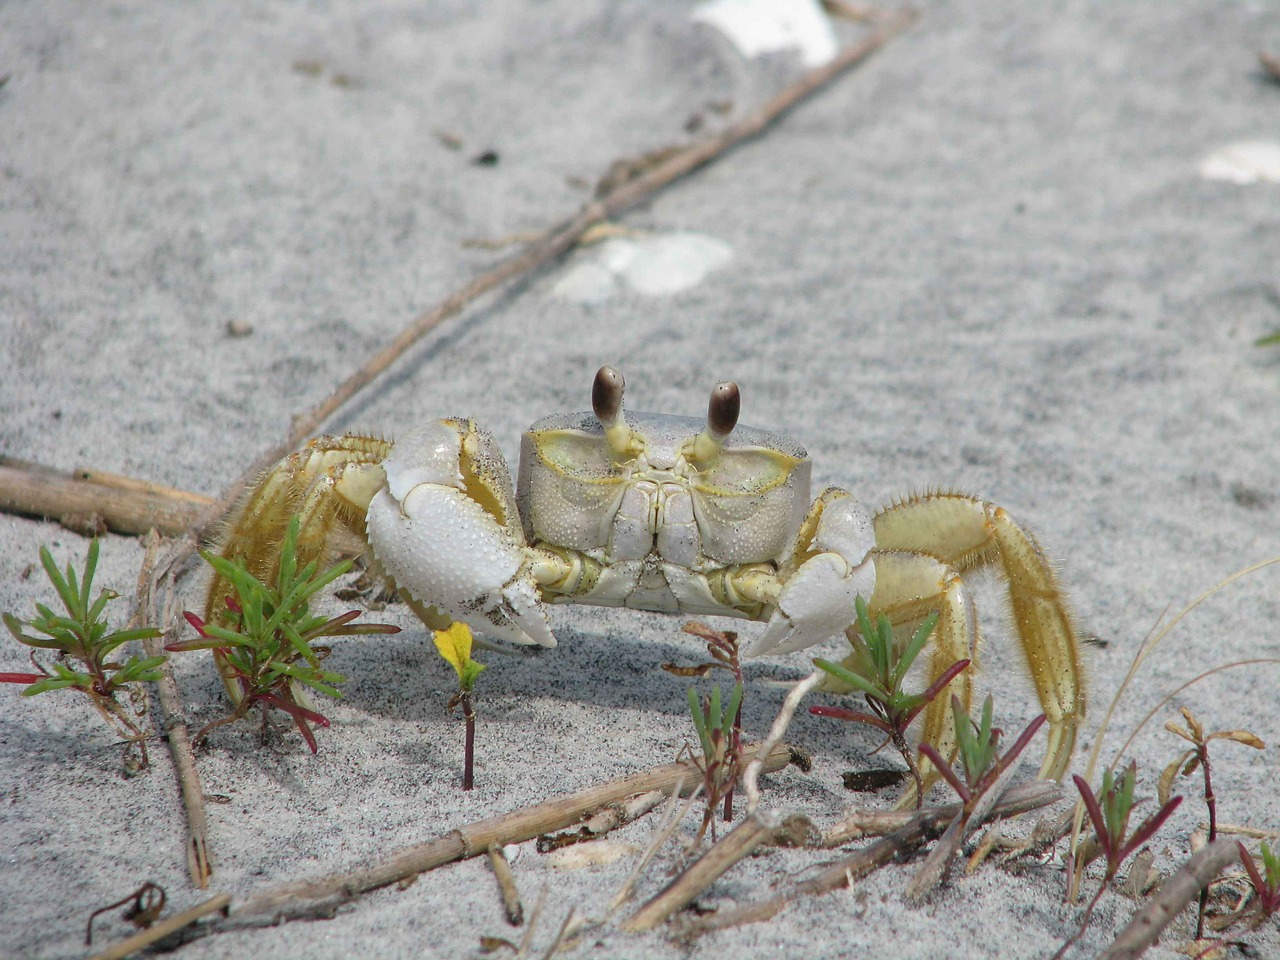 ocypode crab ghost free photo